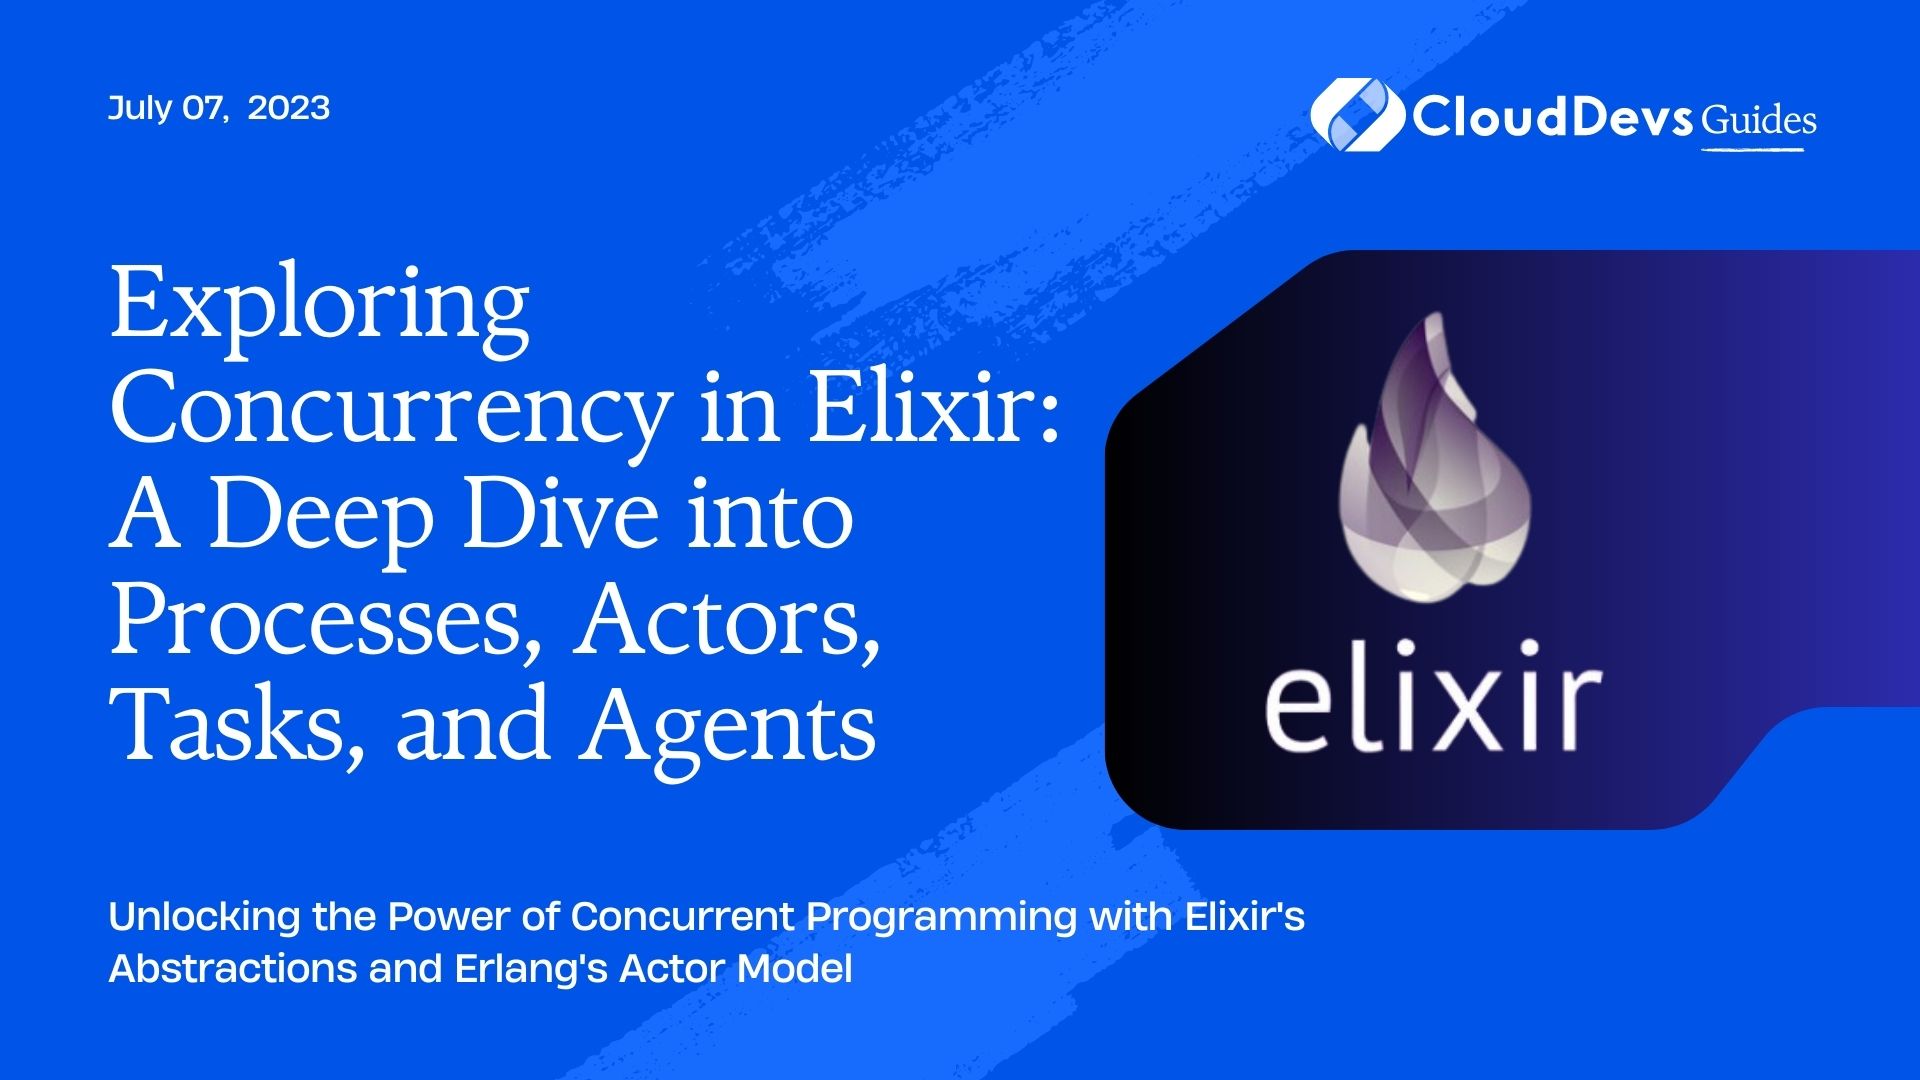 Exploring Concurrency in Elixir: A Deep Dive into Processes, Actors, Tasks, and Agents